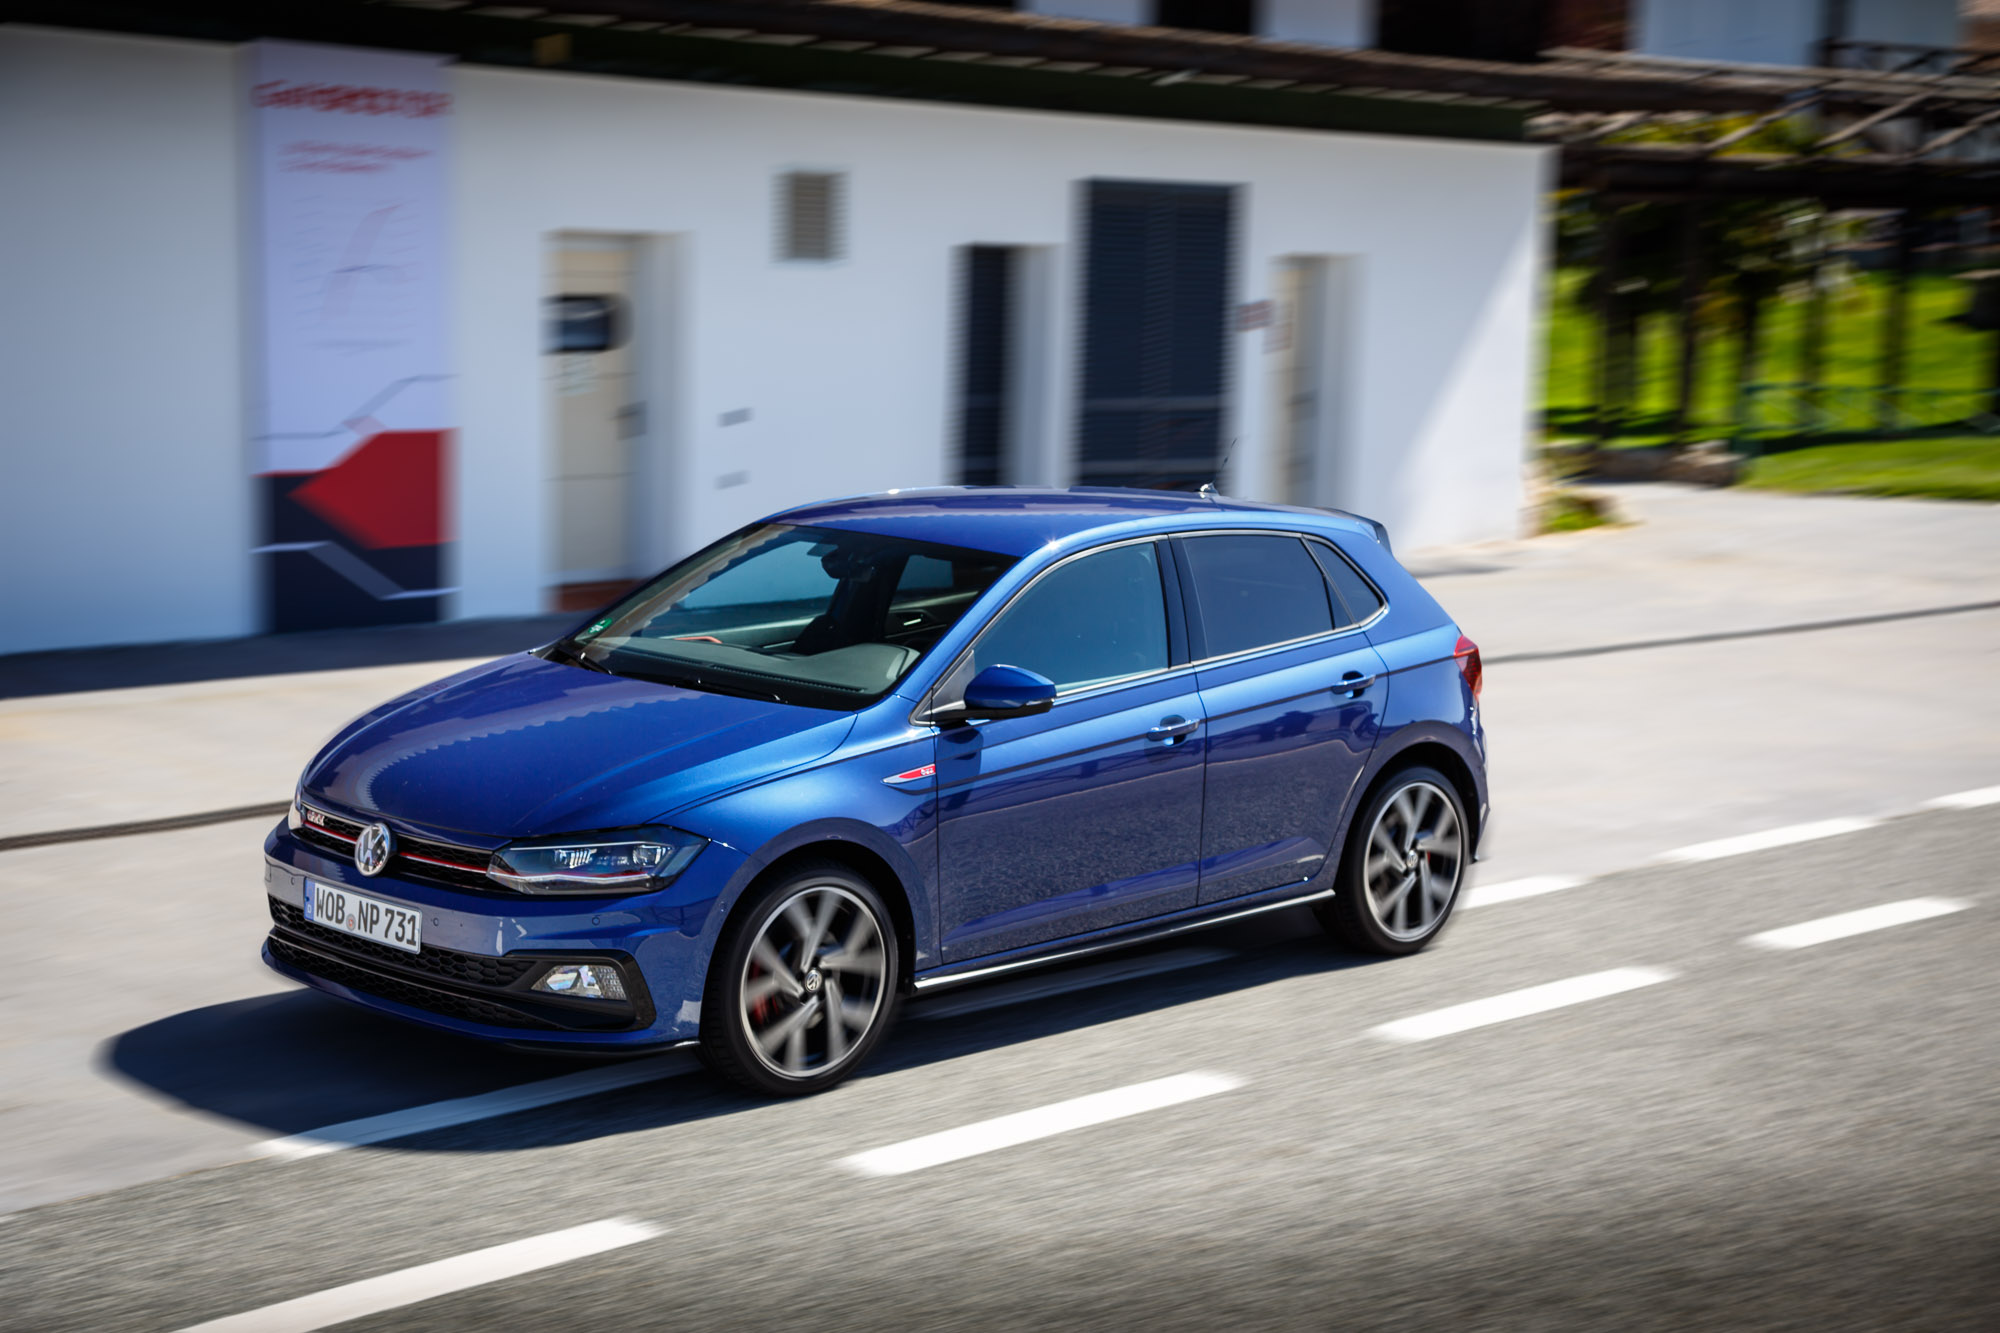 Volkswagen Polo GTI Review (The Polo 